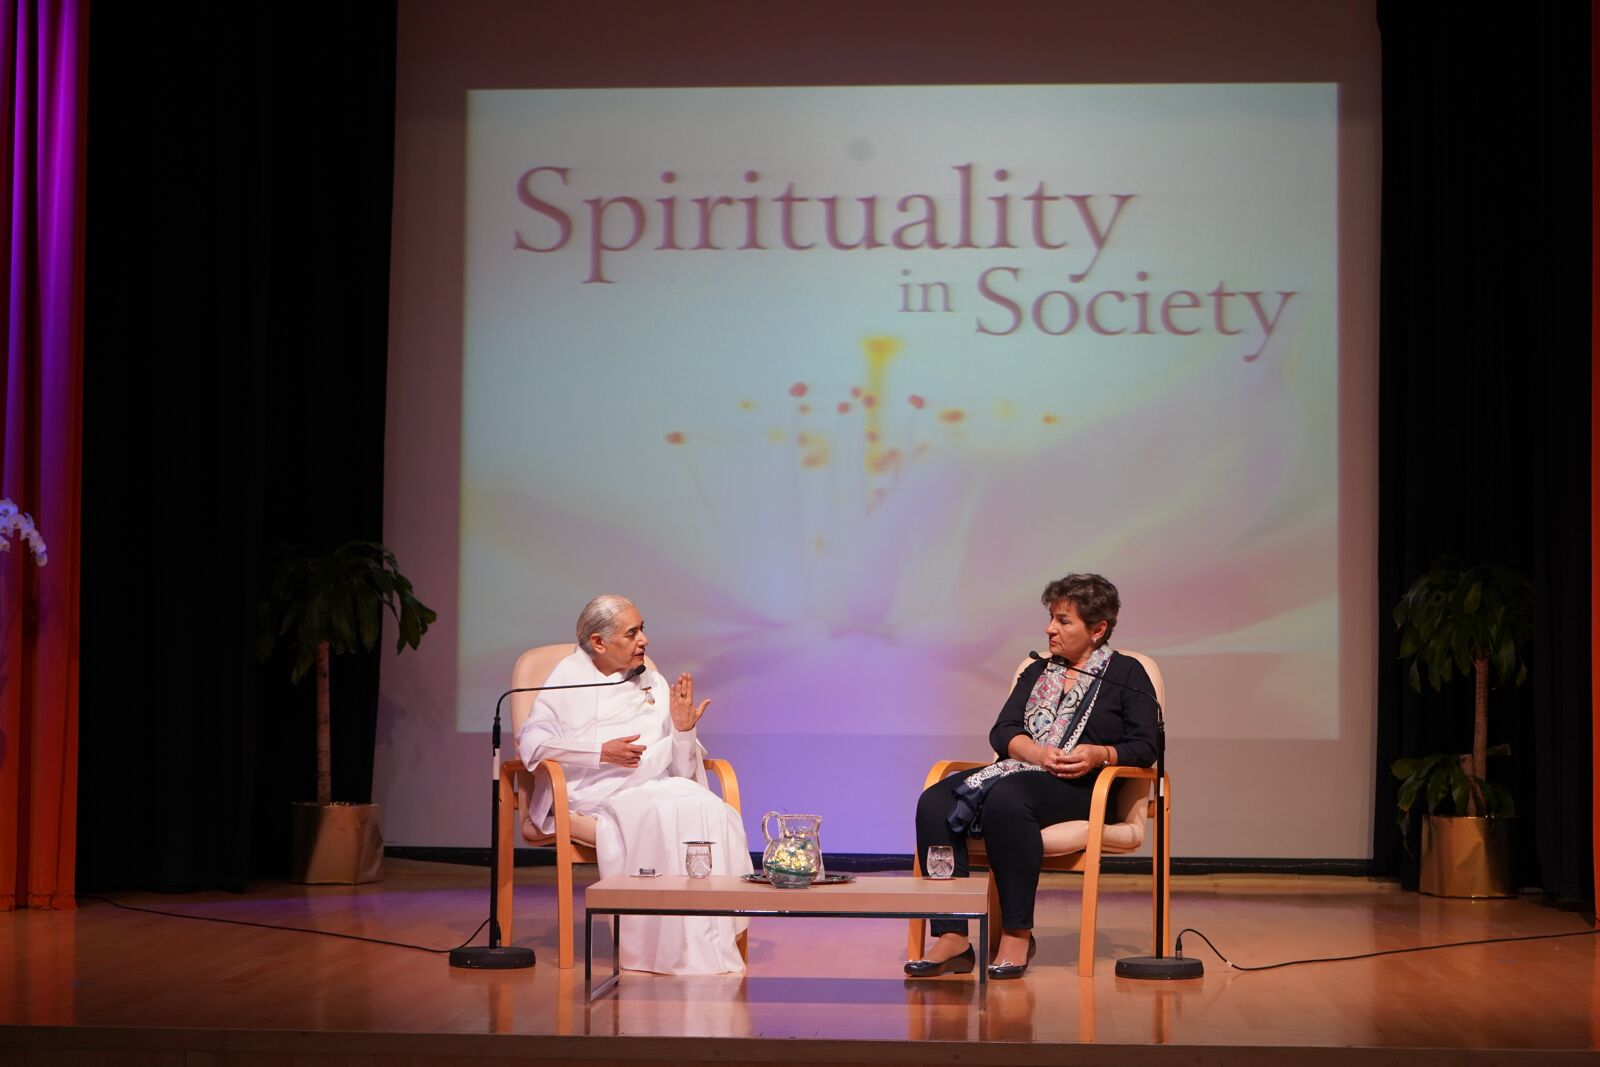 Sister Jayanti with Christiana Figueres speaking on "Spirituality in Society" during London Climate Action Week, (2019). 